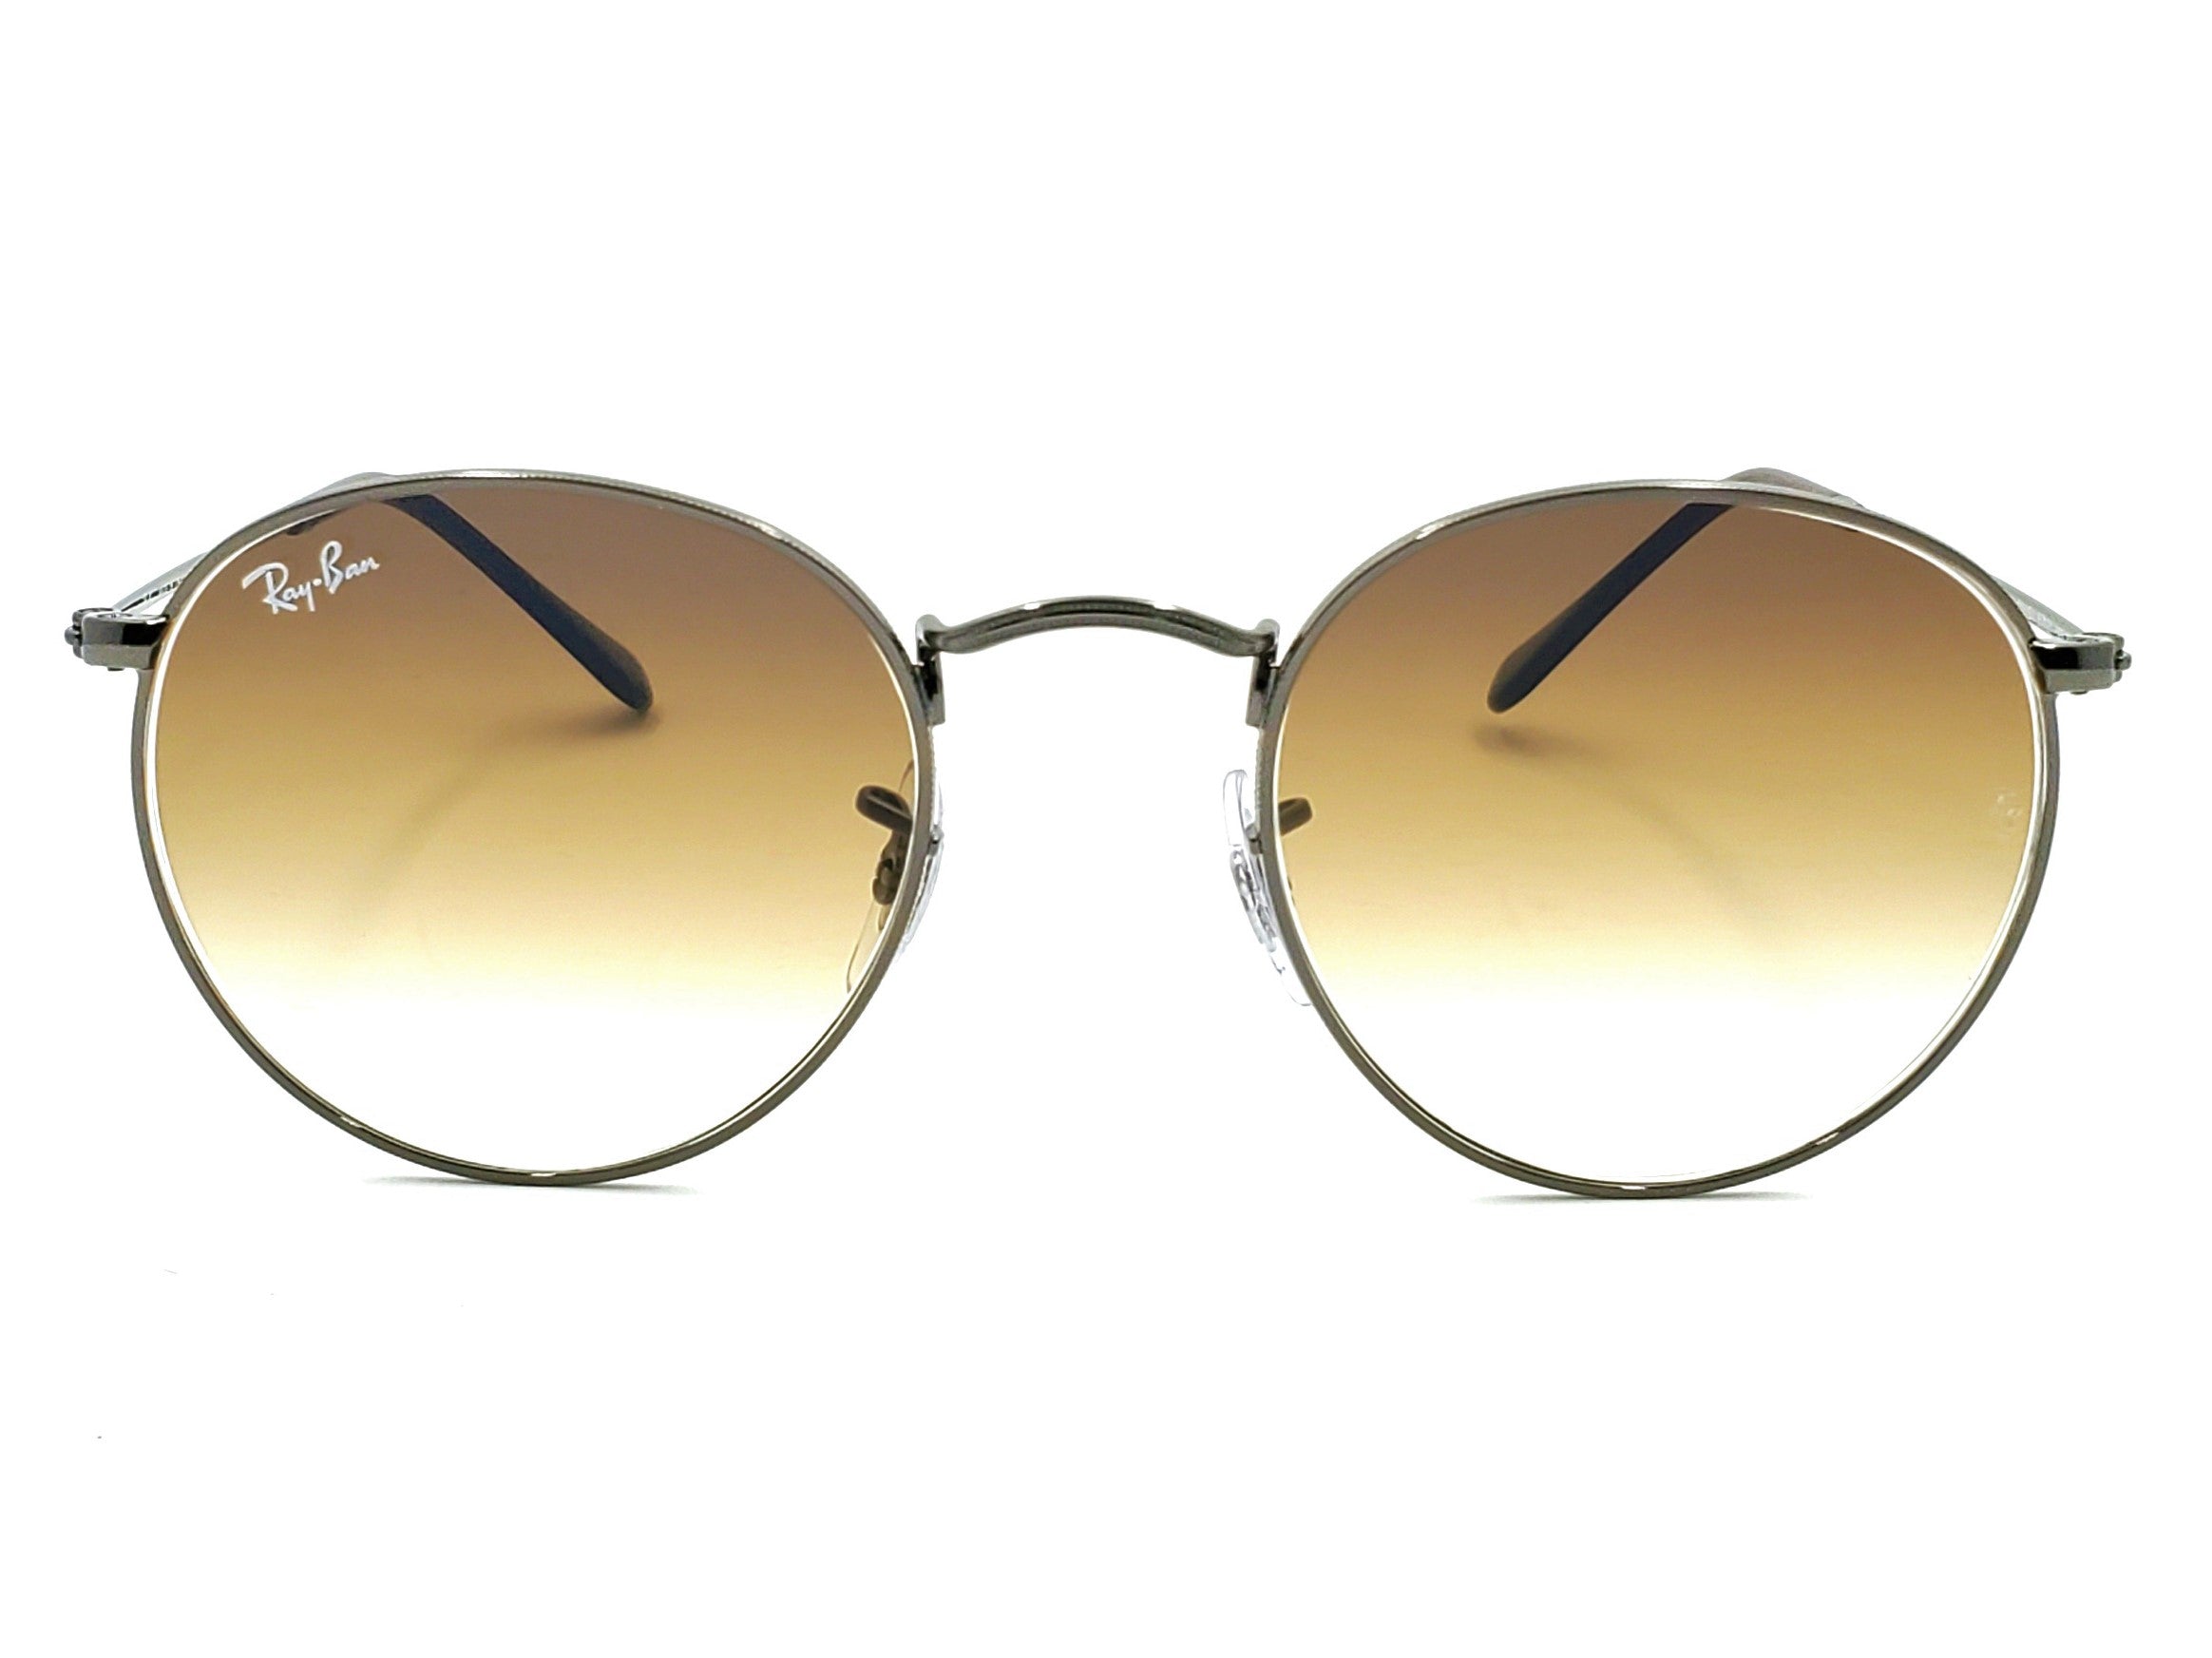 RAY BAN RB3447 ROUND METAL CLASSIC SUNGLASSES